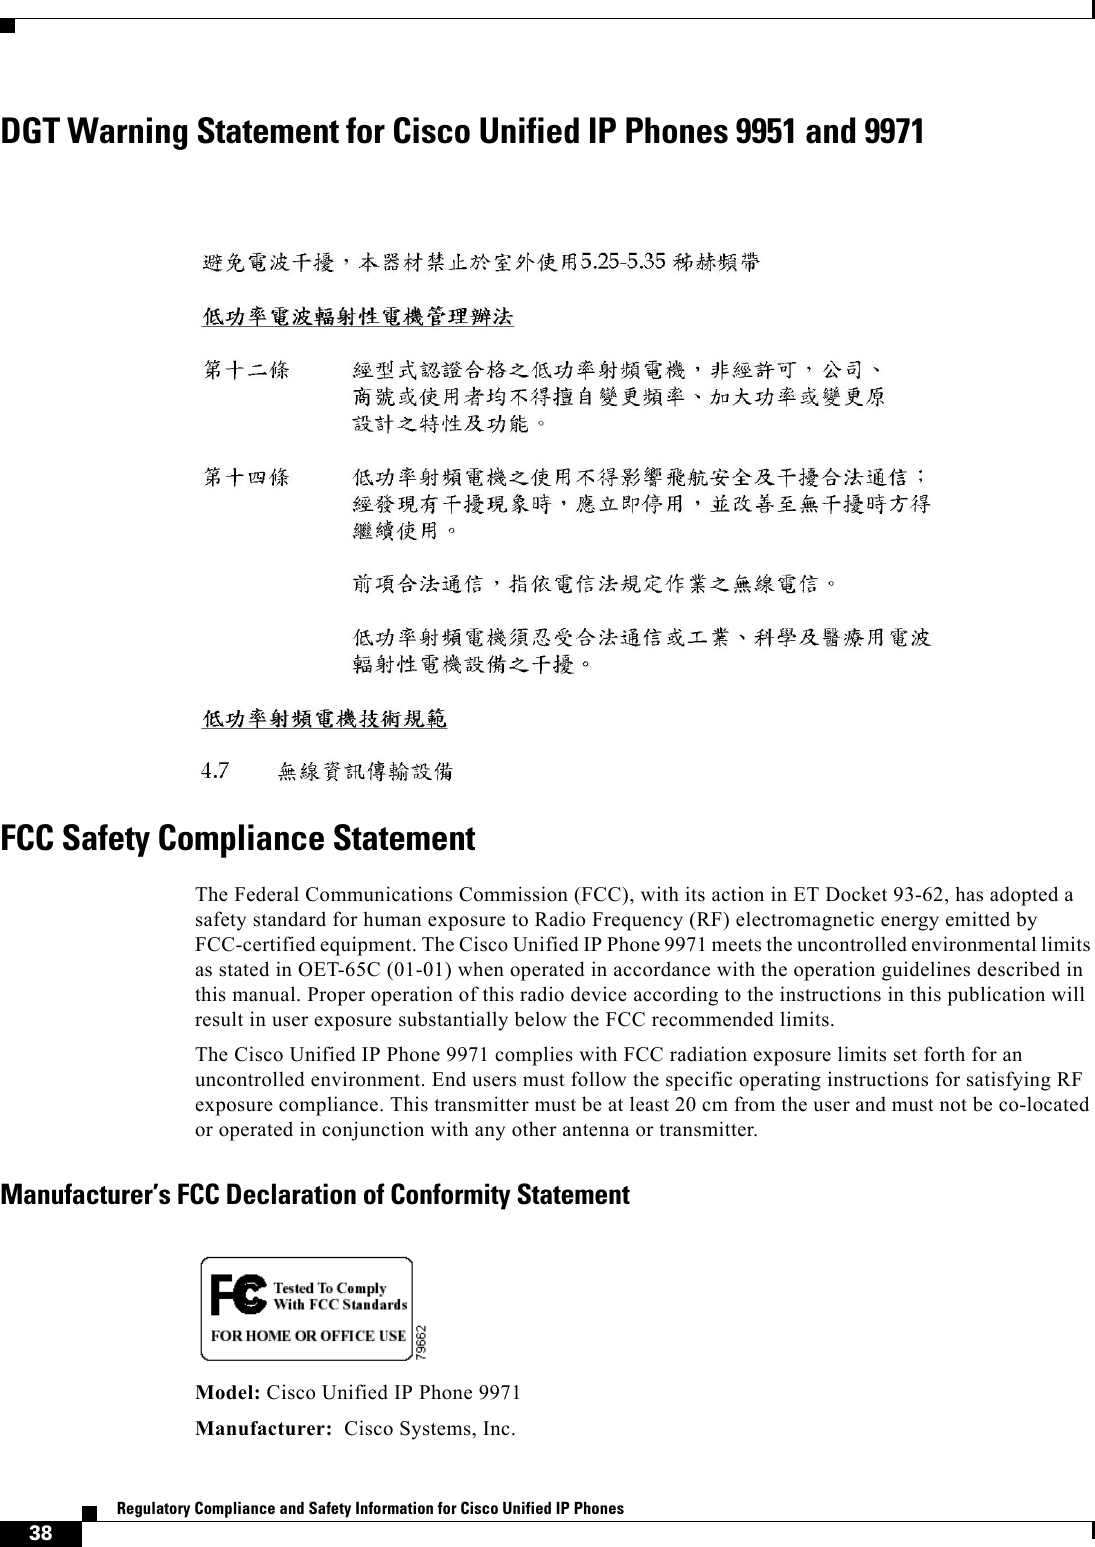  38Regulatory Compliance and Safety Information for Cisco Unified IP Phones DGT Warning Statement for Cisco Unified IP Phones 9951 and 9971FCC Safety Compliance StatementThe Federal Communications Commission (FCC), with its action in ET Docket 93-62, has adopted a safety standard for human exposure to Radio Frequency (RF) electromagnetic energy emitted by FCC-certified equipment. The Cisco Unified IP Phone 9971 meets the uncontrolled environmental limits as stated in OET-65C (01-01) when operated in accordance with the operation guidelines described in this manual. Proper operation of this radio device according to the instructions in this publication will result in user exposure substantially below the FCC recommended limits.The Cisco Unified IP Phone 9971 complies with FCC radiation exposure limits set forth for an uncontrolled environment. End users must follow the specific operating instructions for satisfying RF exposure compliance. This transmitter must be at least 20 cm from the user and must not be co-located or operated in conjunction with any other antenna or transmitter.Manufacturer’s FCC Declaration of Conformity StatementModel: Cisco Unified IP Phone 9971Manufacturer:  Cisco Systems, Inc.